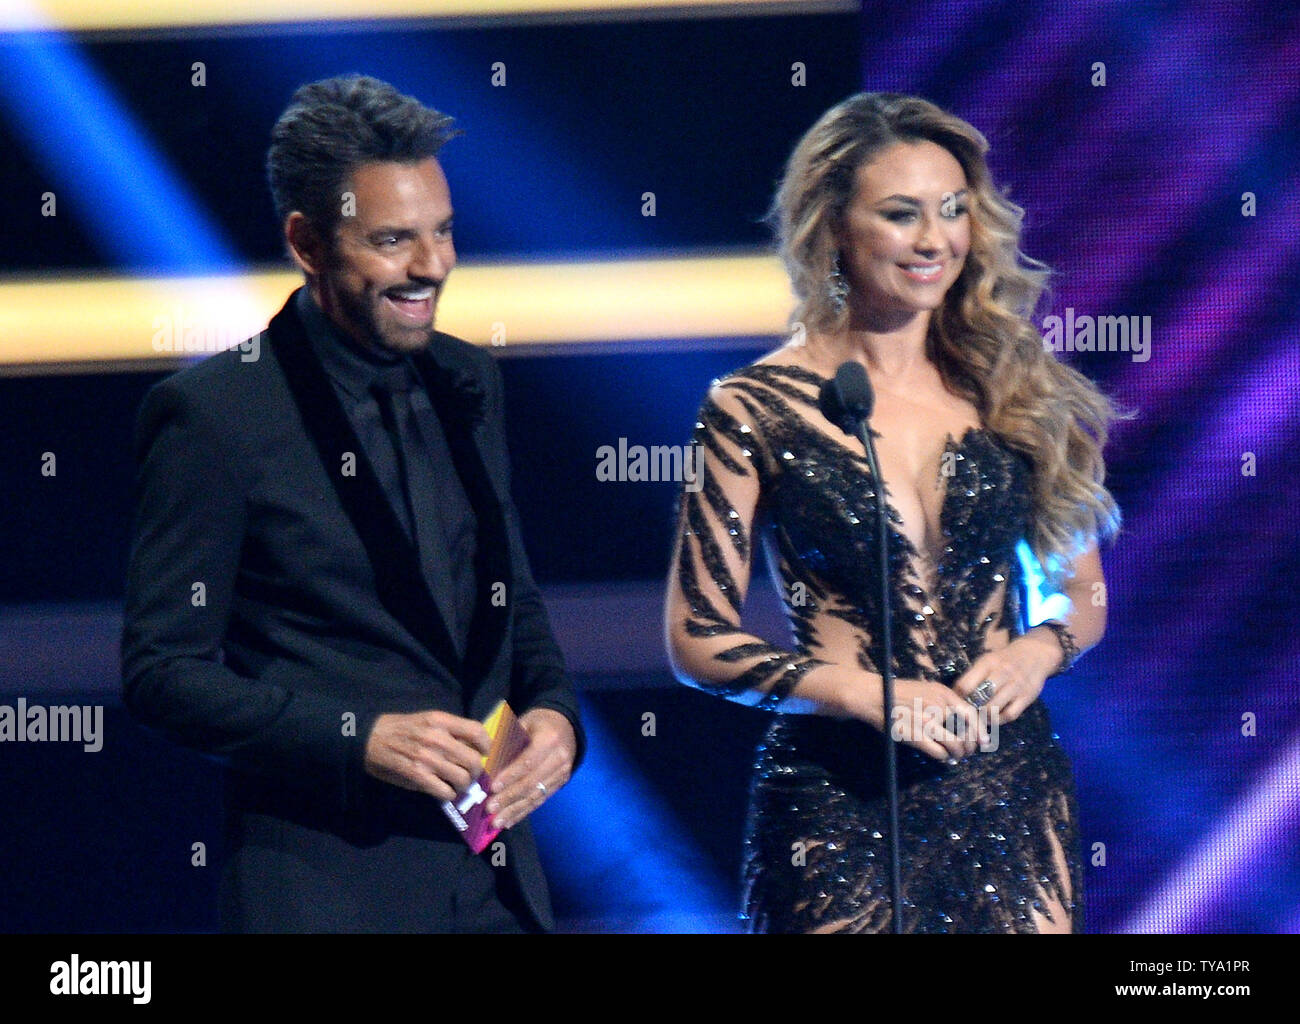 Eugenio Derbez (L) and Aracely Arambula present an award onstage during the 2018 Billboard Latin Music Awards at the Mandalay Bay Events Center in Las Vegas, Nevada on April 26, 2018. Photo by Jim Ruymen/UPI Stock Photo